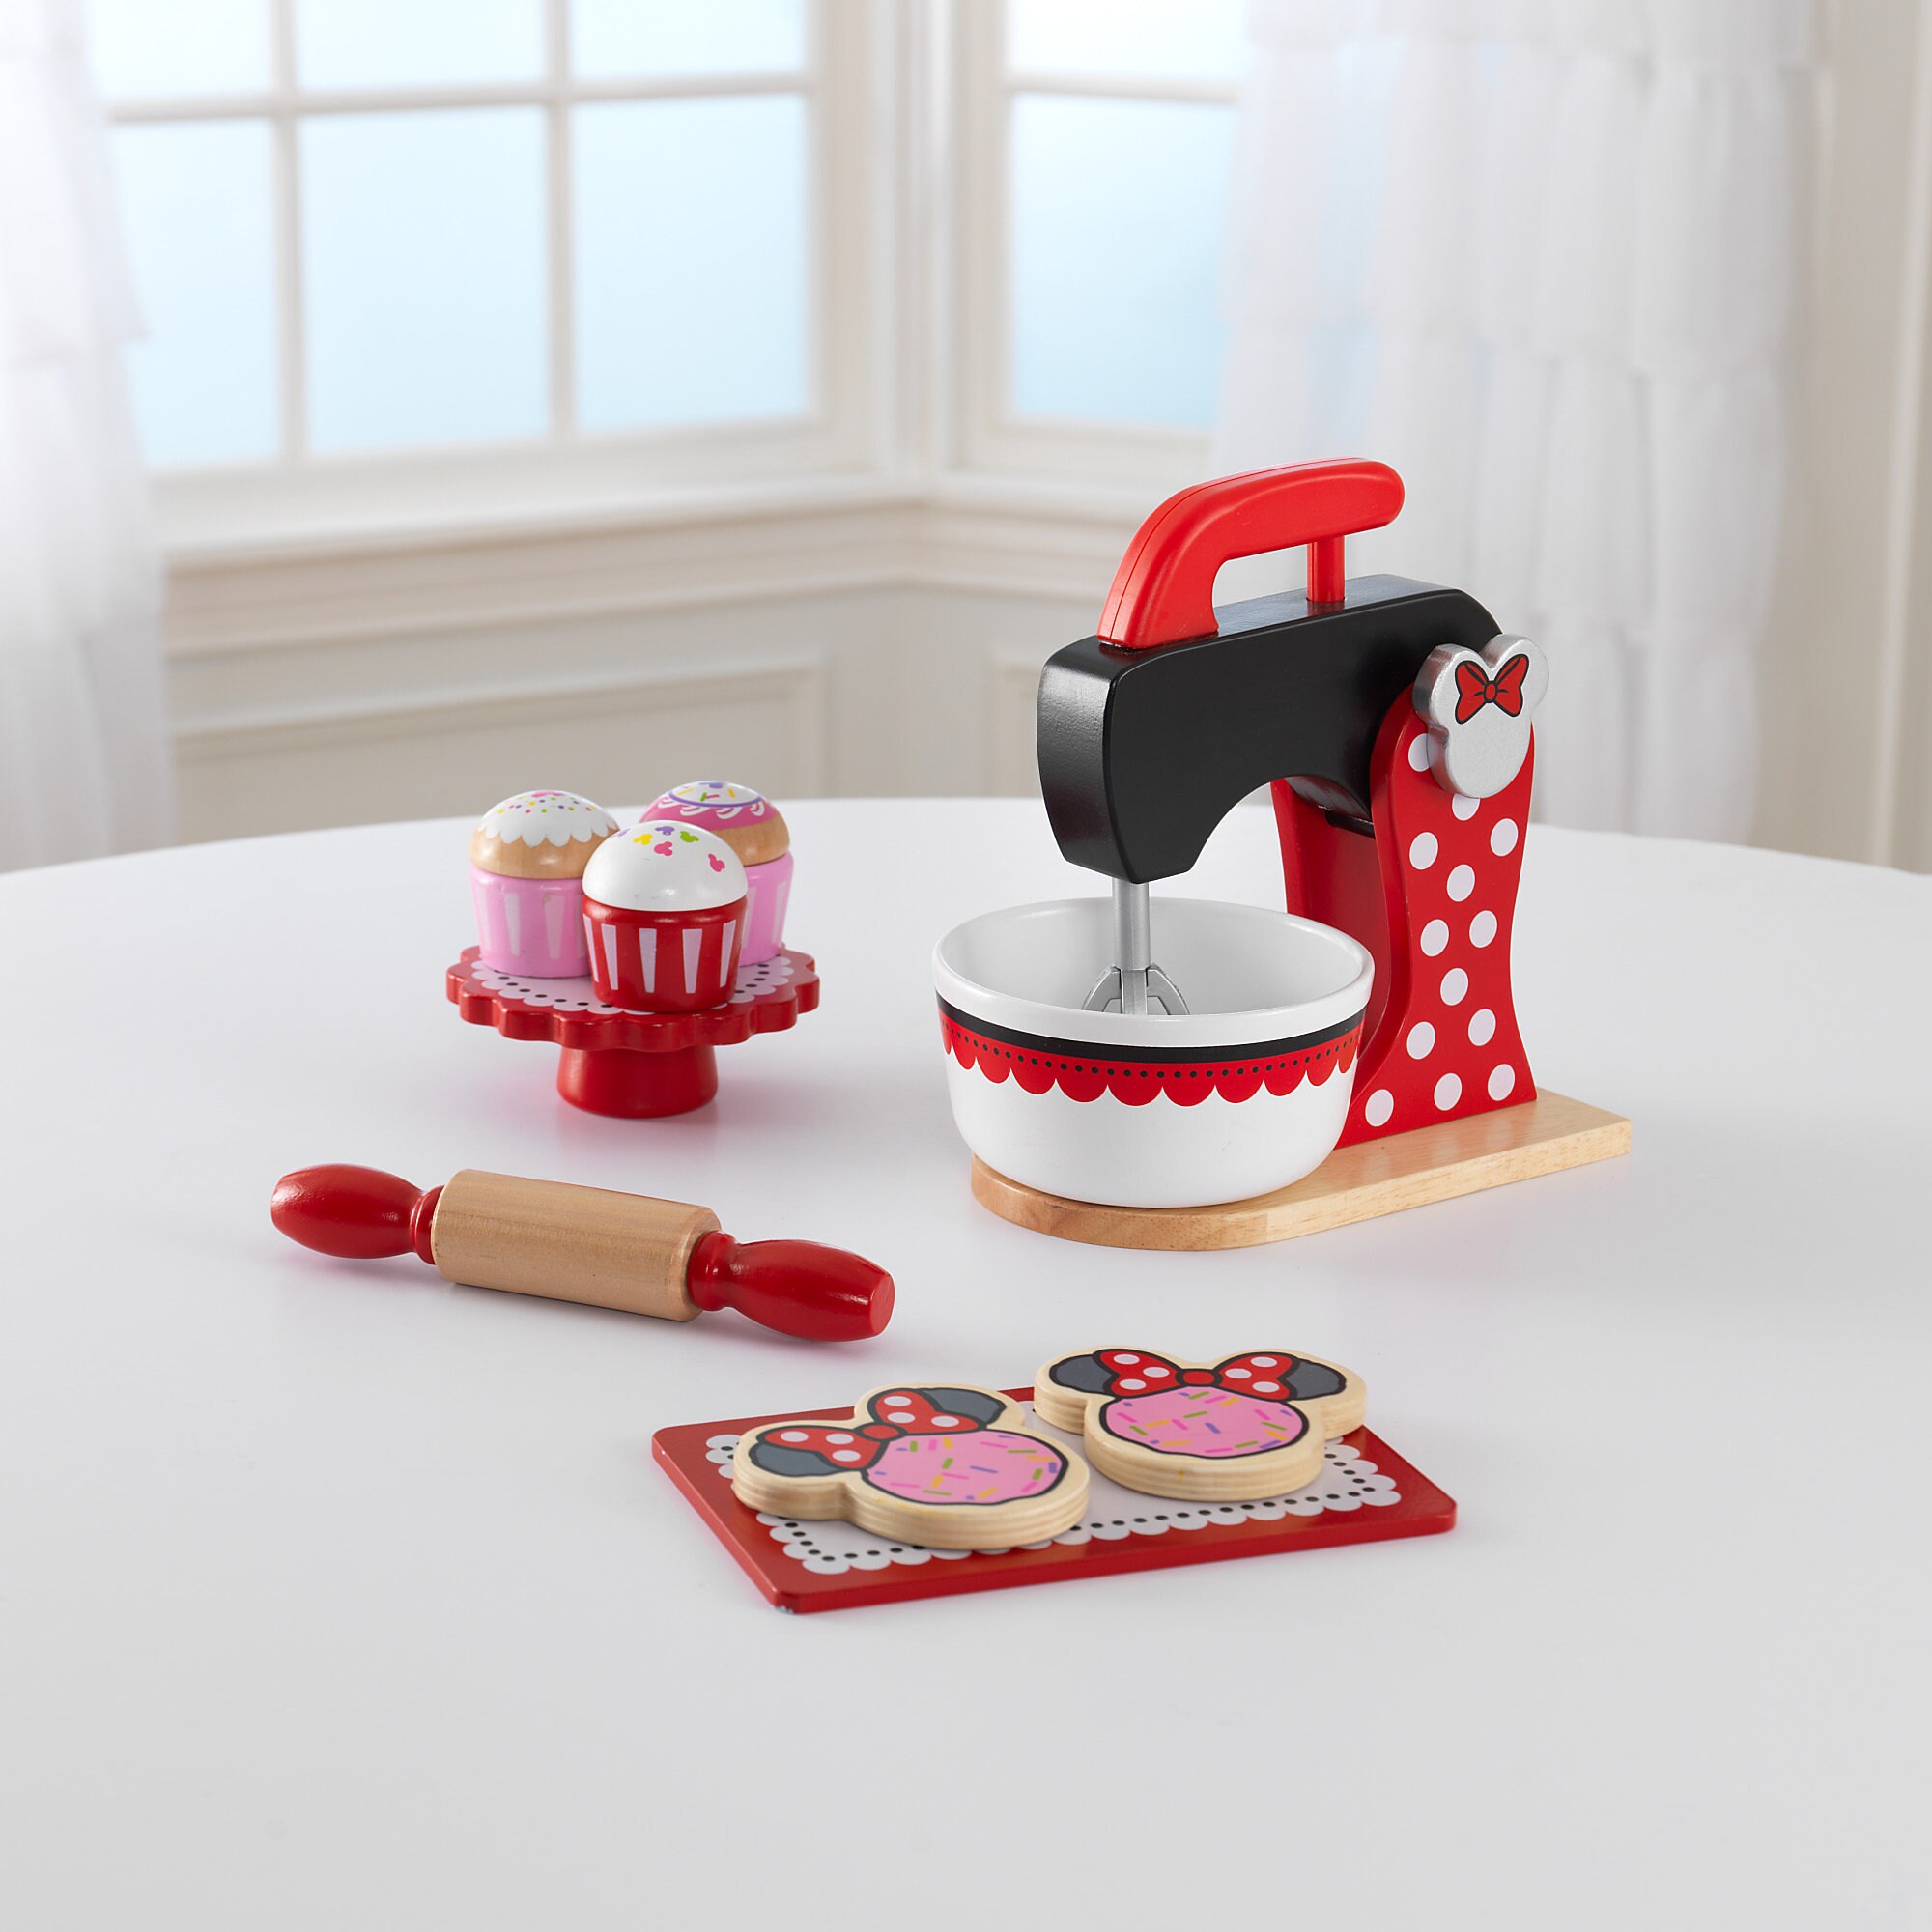 Minnie Mouse Baking and Treats Set by KidKraft - Red